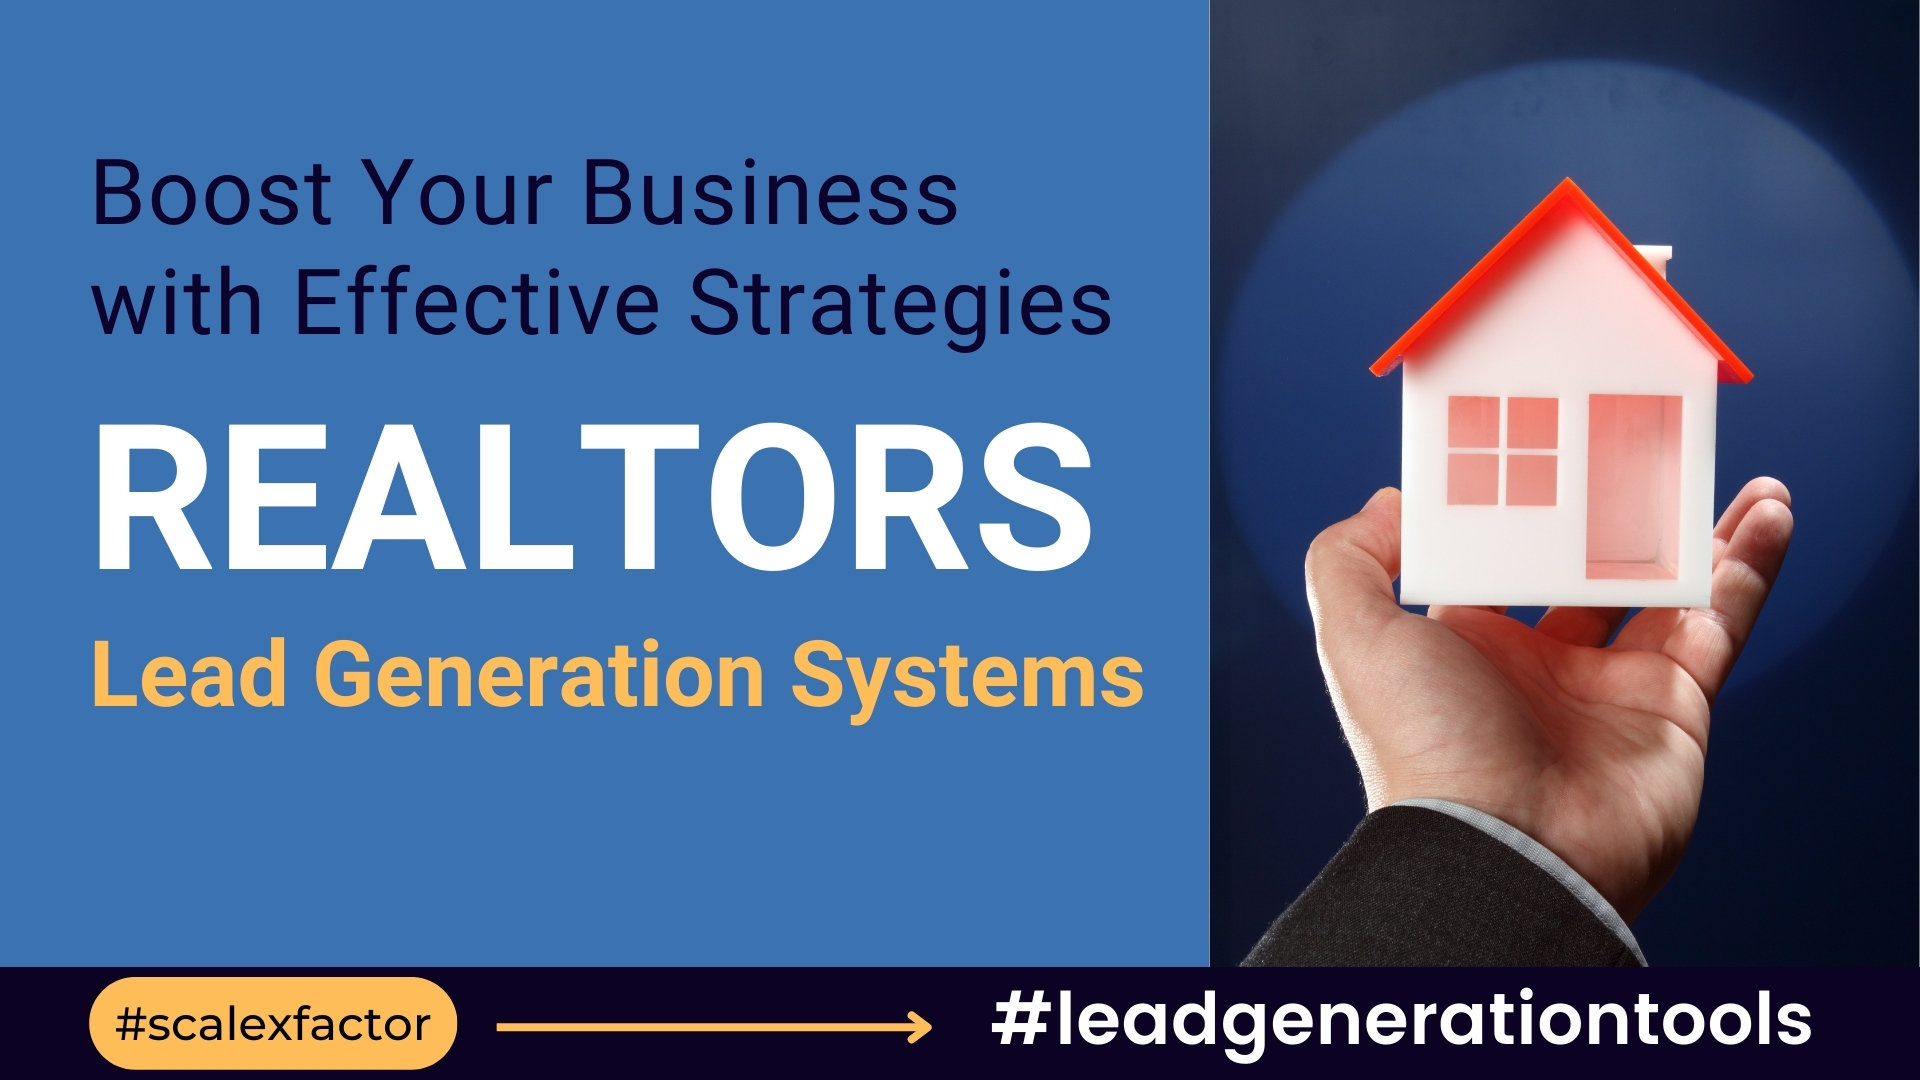 Lead Generation Systems for Realtors: Boost Your Business with Effective Strategies